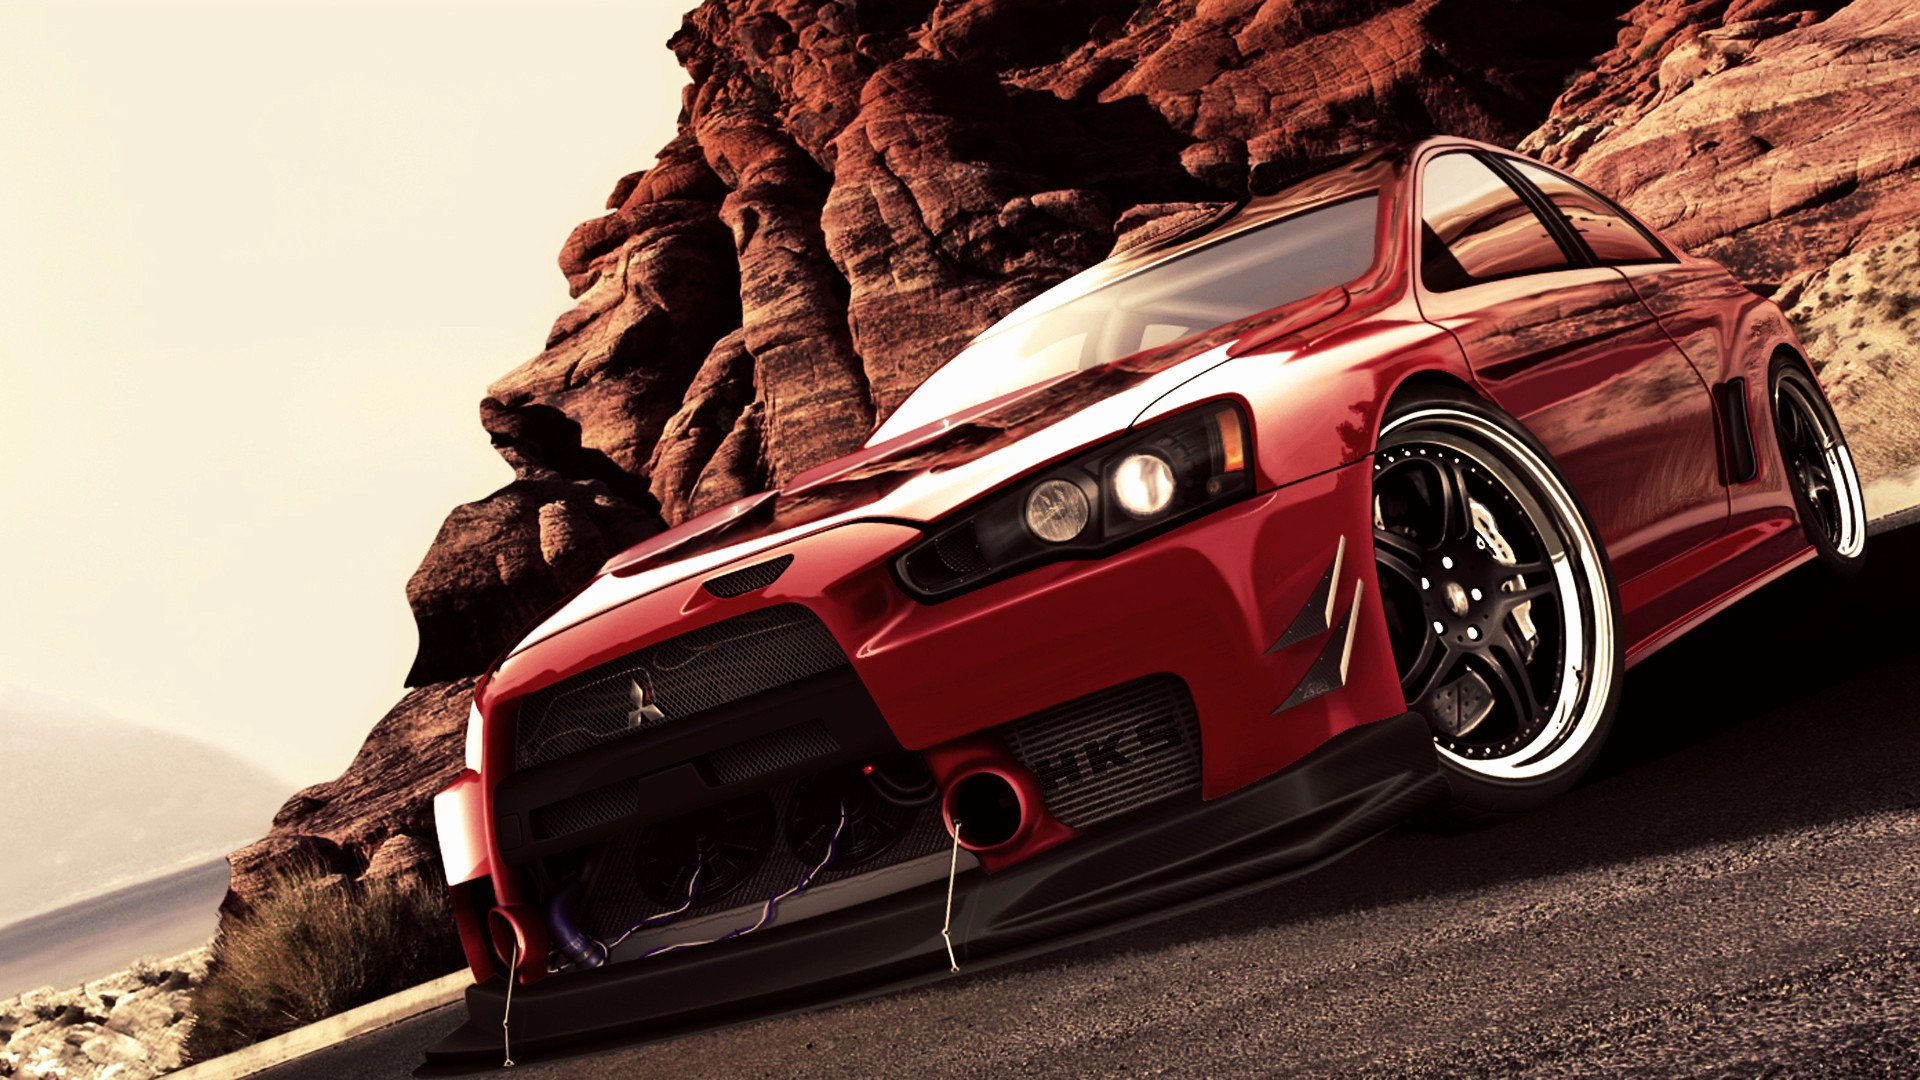 1920x1080 Tuned Cars Wallpapers New Car Images Road Amazing Autos Desktop Images  Background Photos